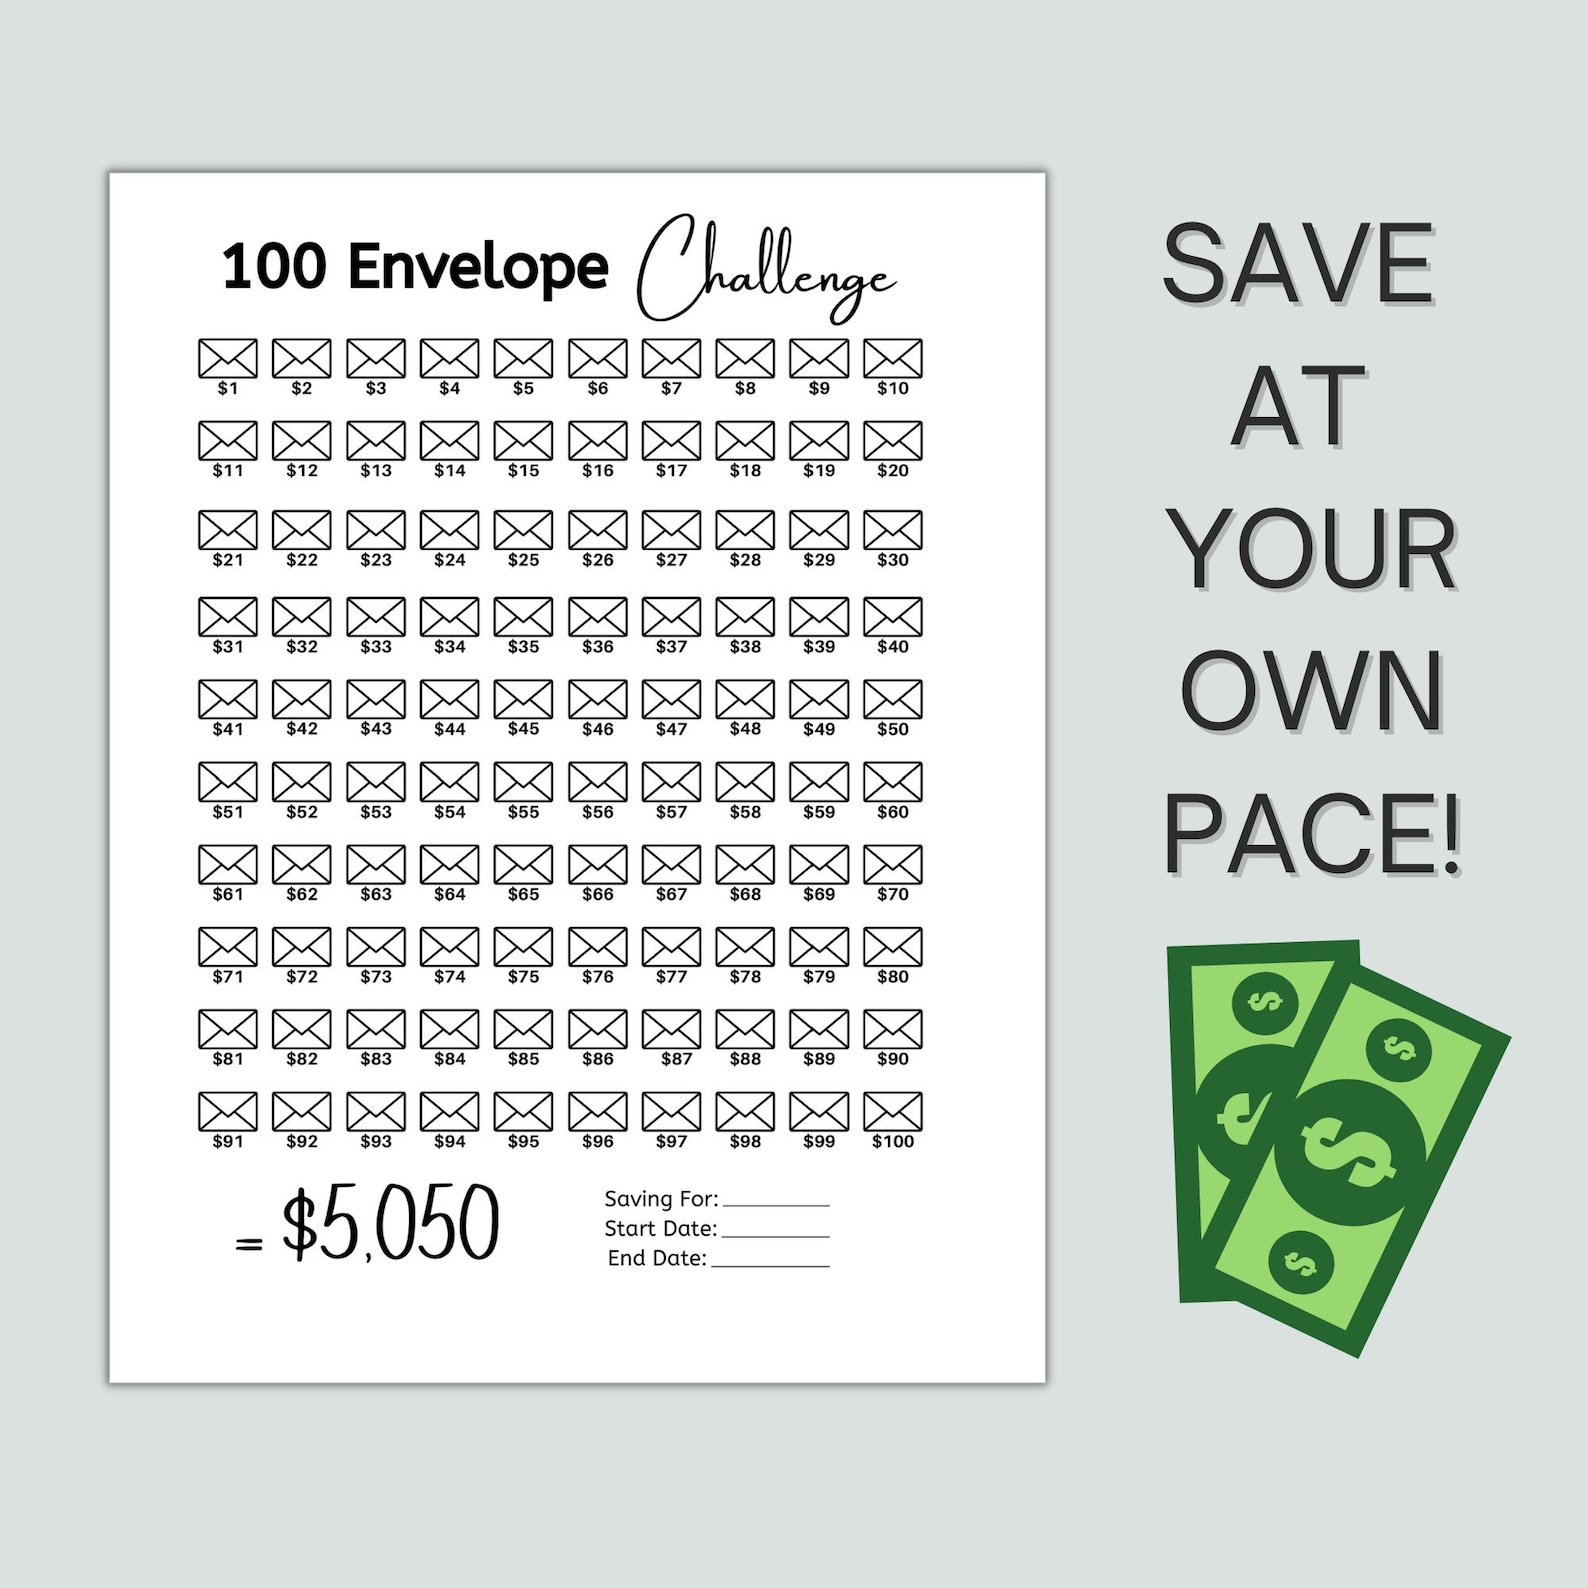 How Much Money Can You Save With The 100 Envelope Challenge